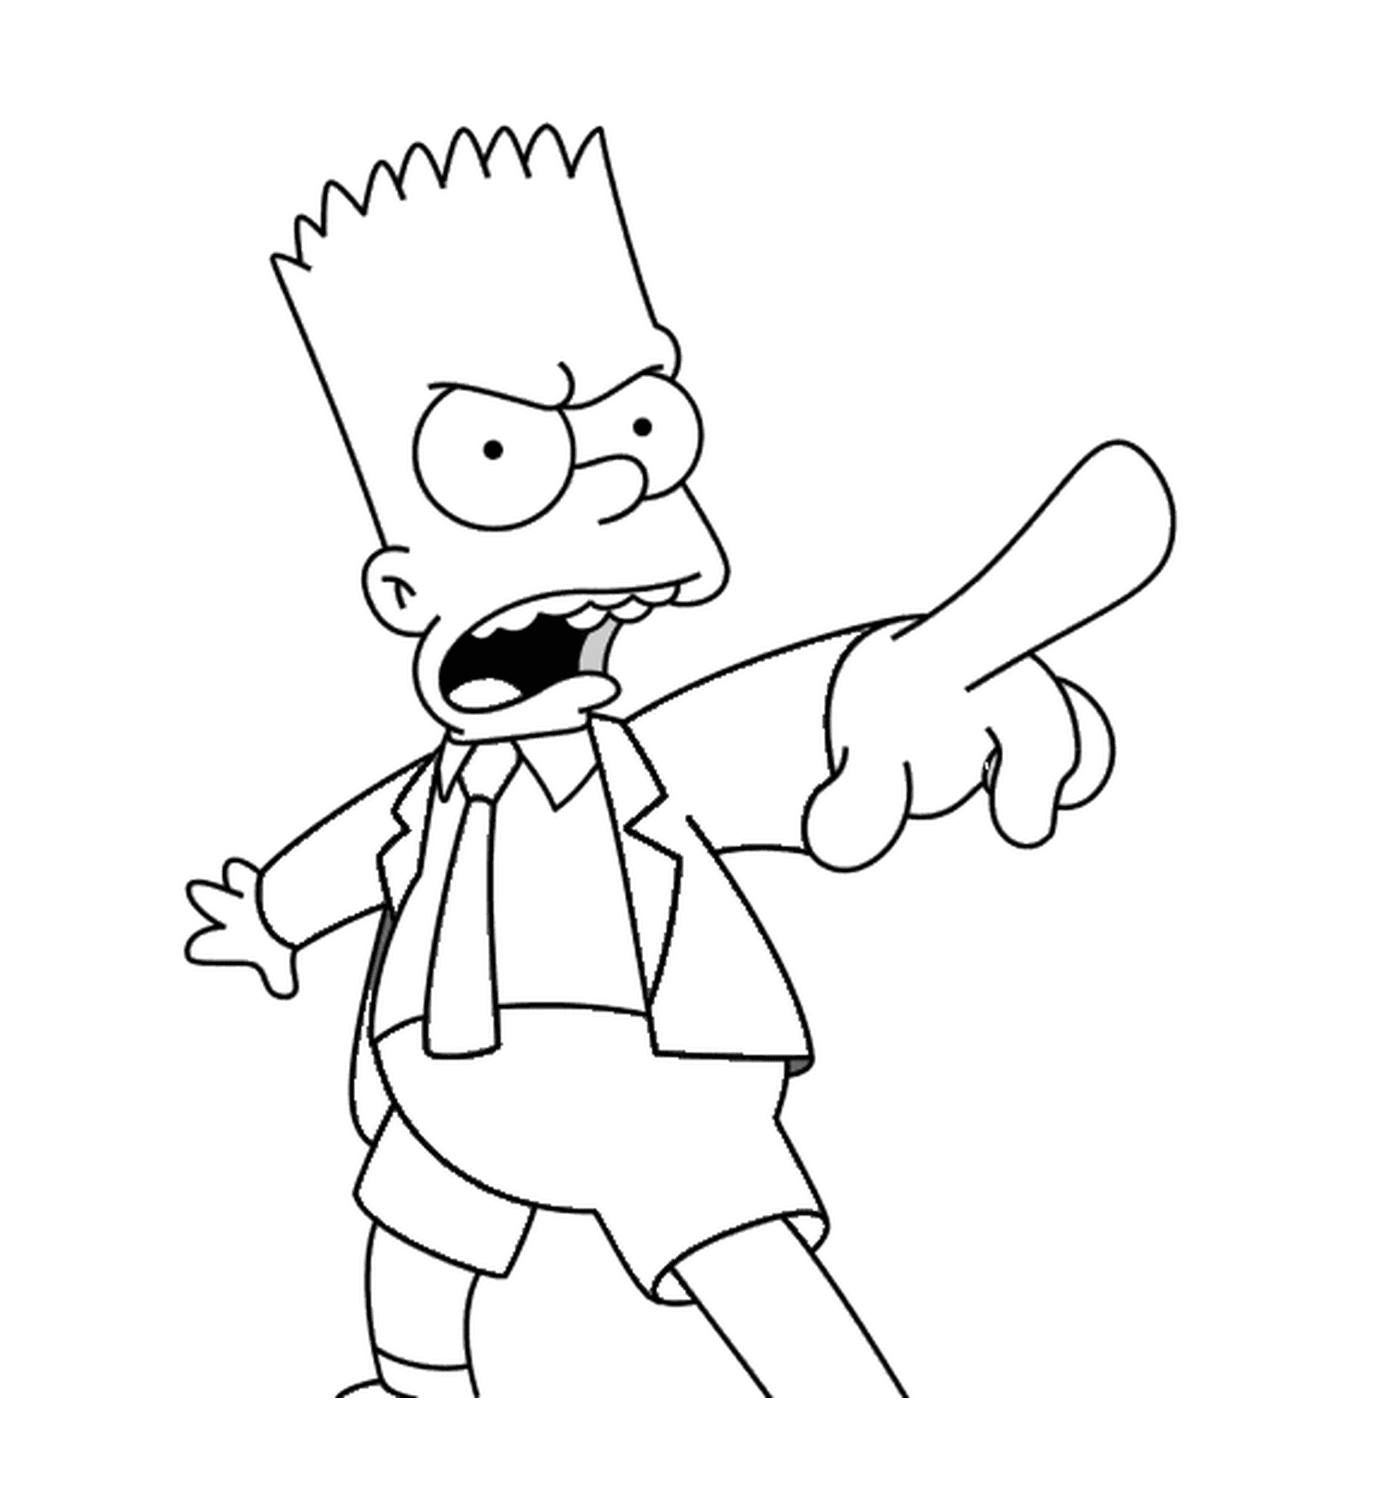  Bart's angry with a tie 